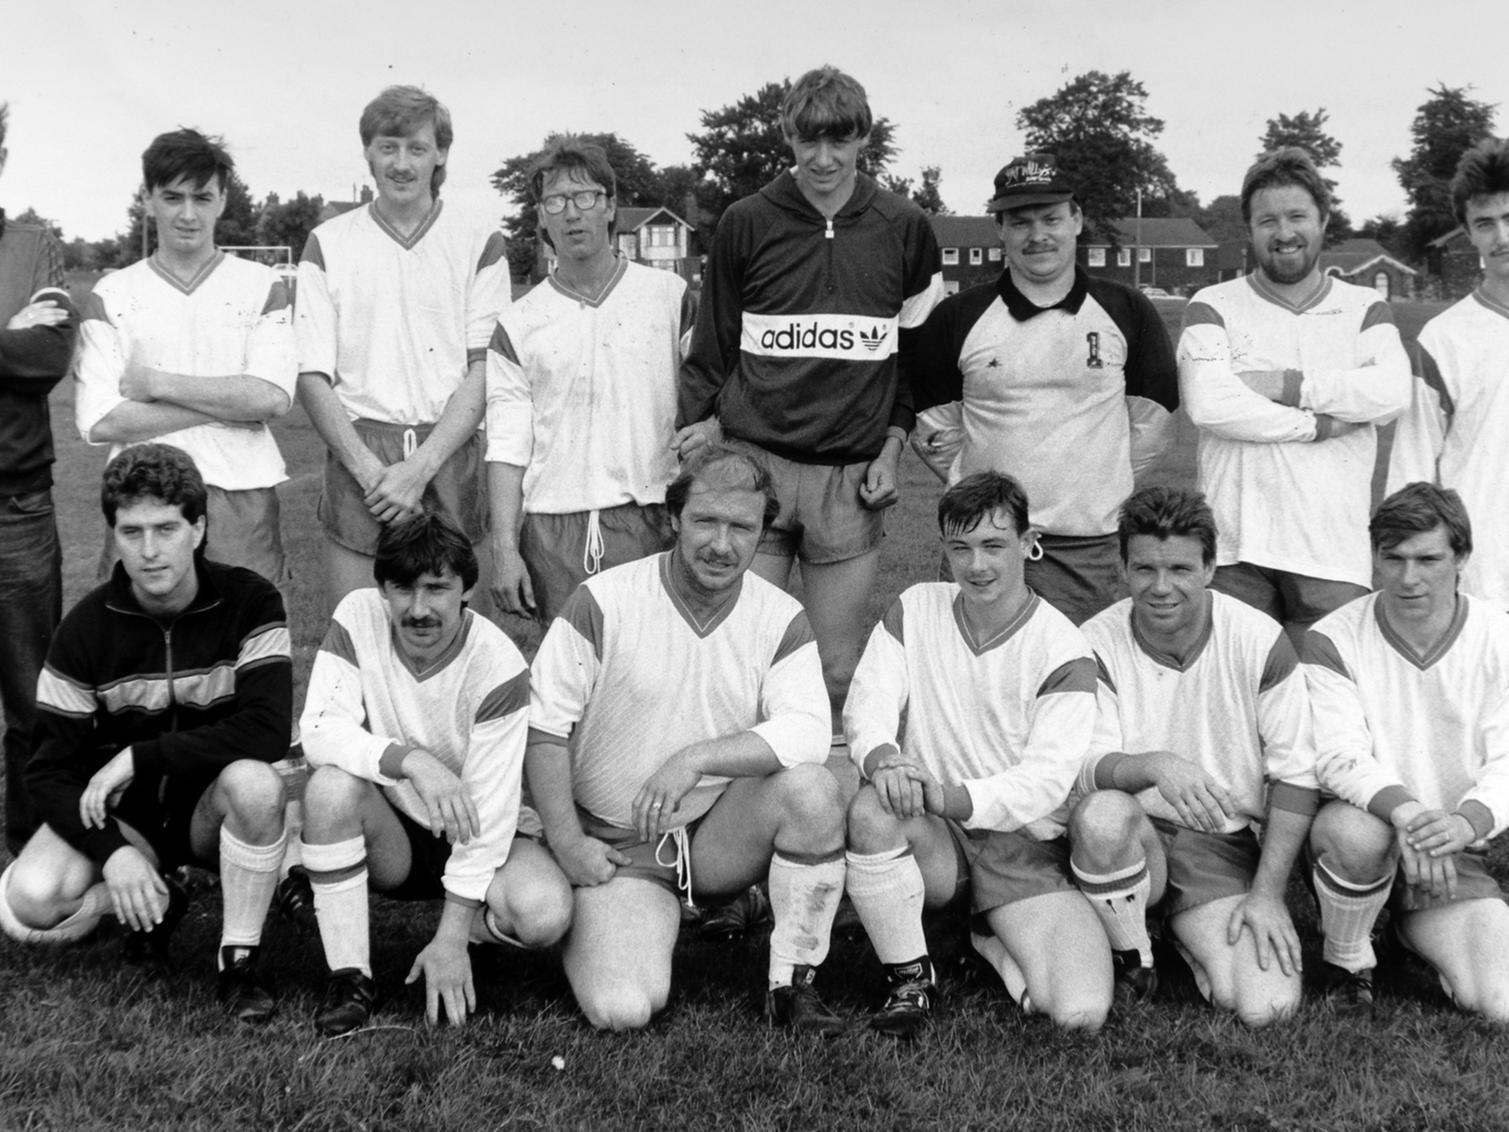 Back: Jim Daly (manager), Kevin Quinn, Brian Asquith, Steve Roberts, Stuart Monaghan, Mark Coulson, Terry Stansfield, Phil Stainforth. Front: Pete MacGloin, Nigel Jessey, Malcolm Jessey, Anthony Marsh, Graham Jessey, Neville Jessey